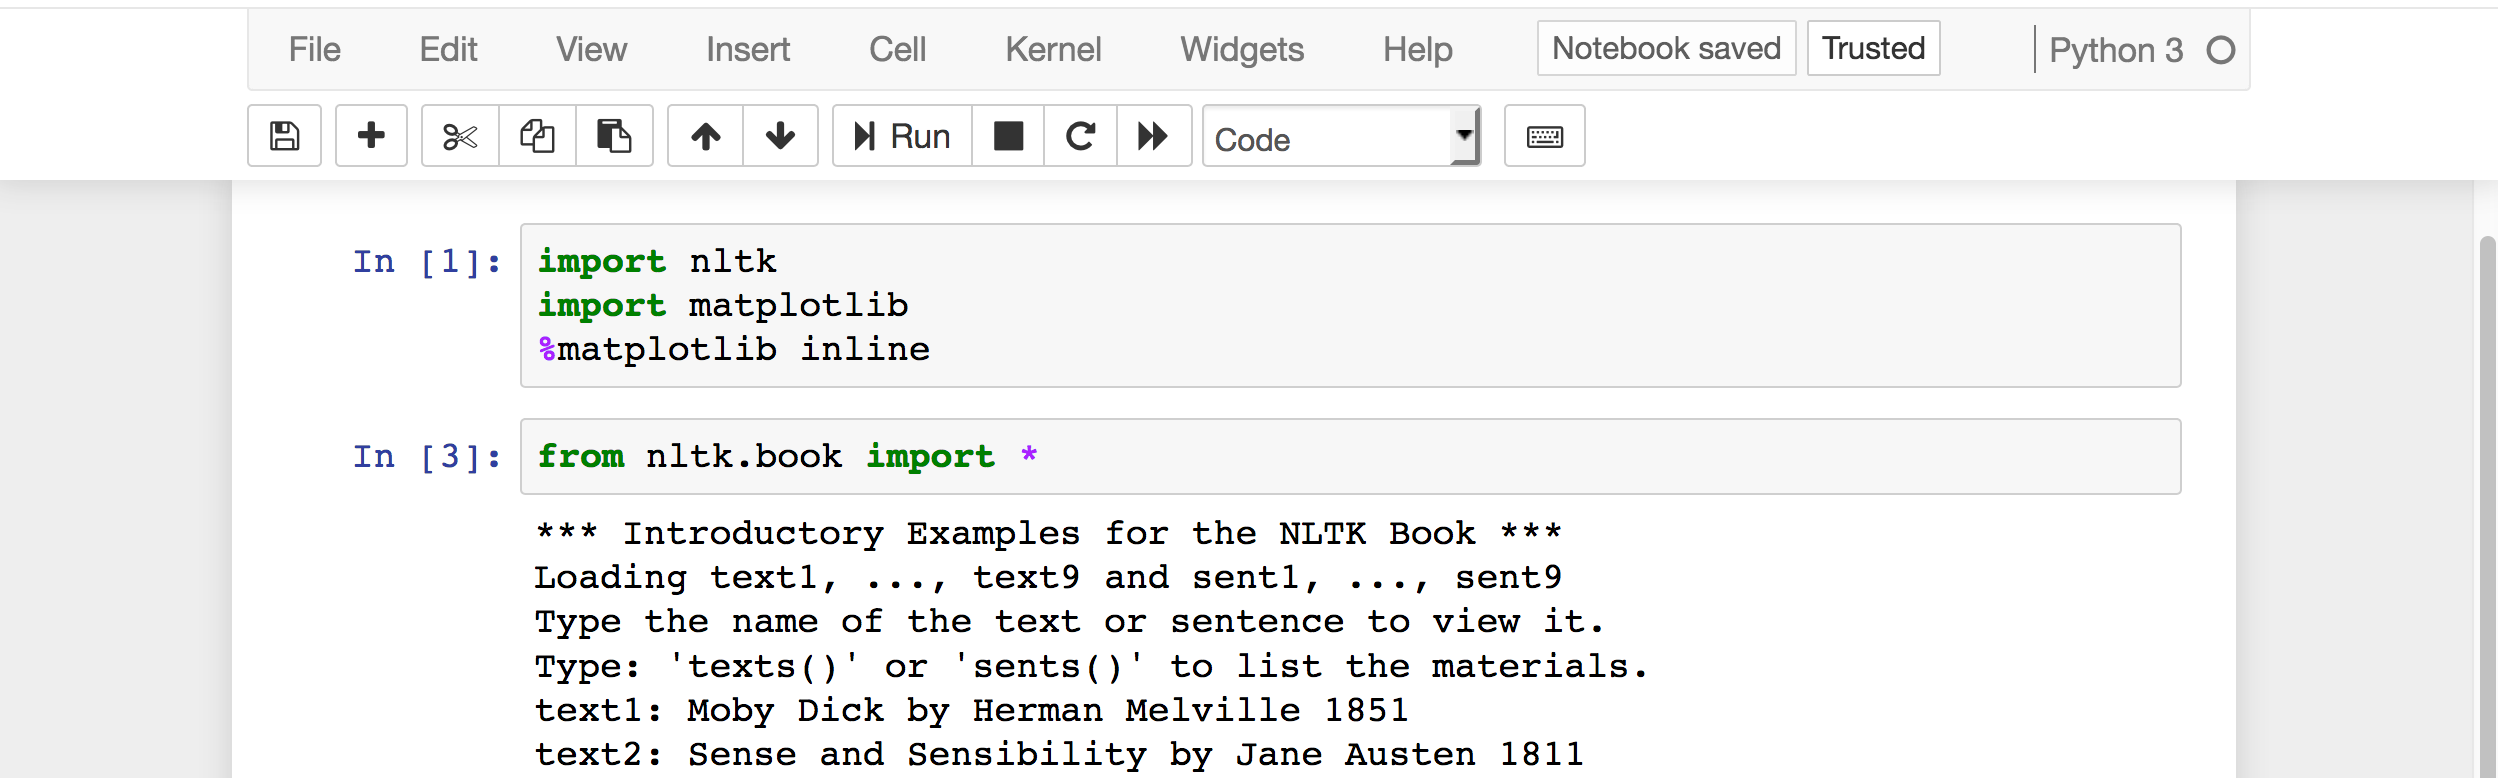 Image showing a second cell with the "from nltk.book import *" line and another line defining some text data